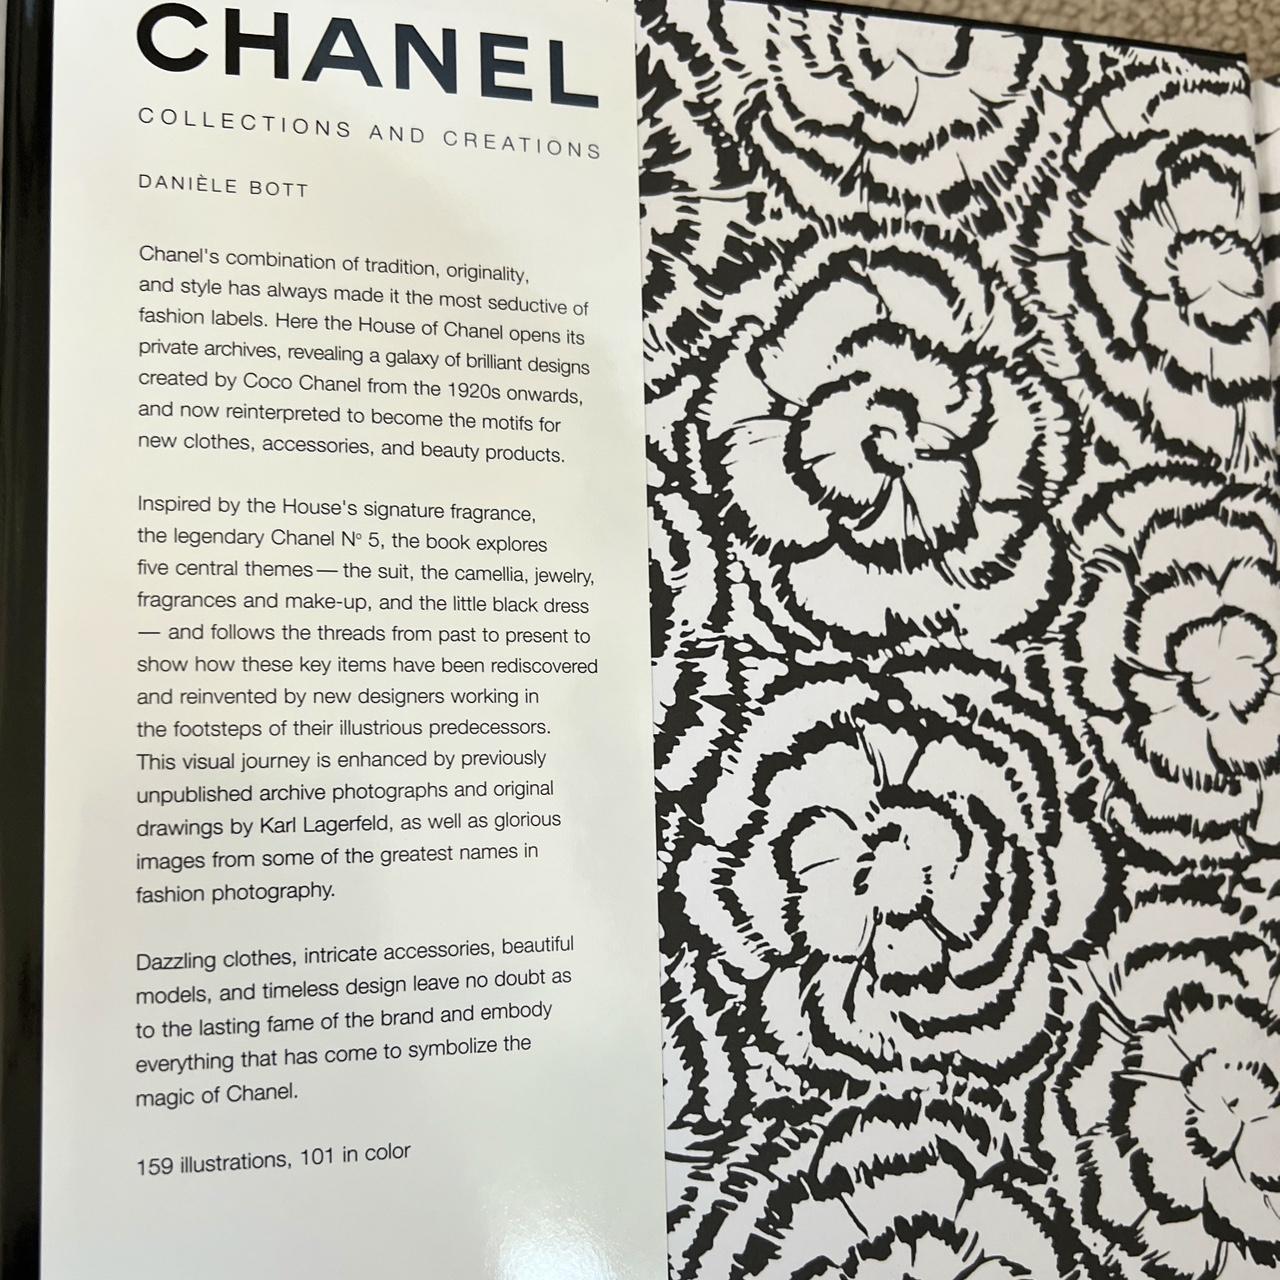 Perfect condition Chanel book 💗 - Depop